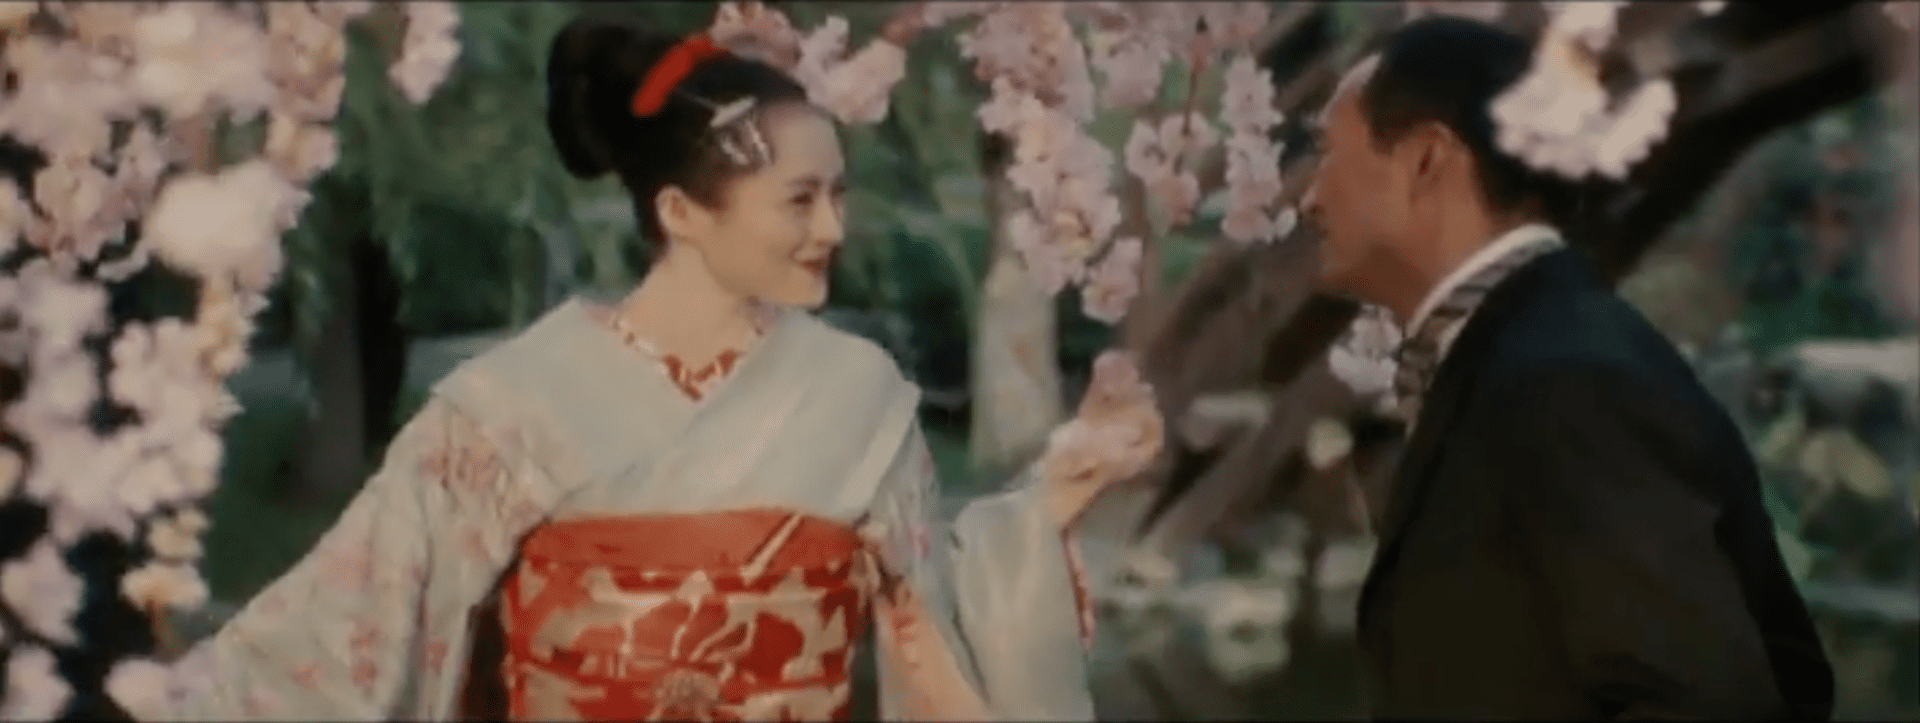 A woman in traditional japanese clothing holding flowers.